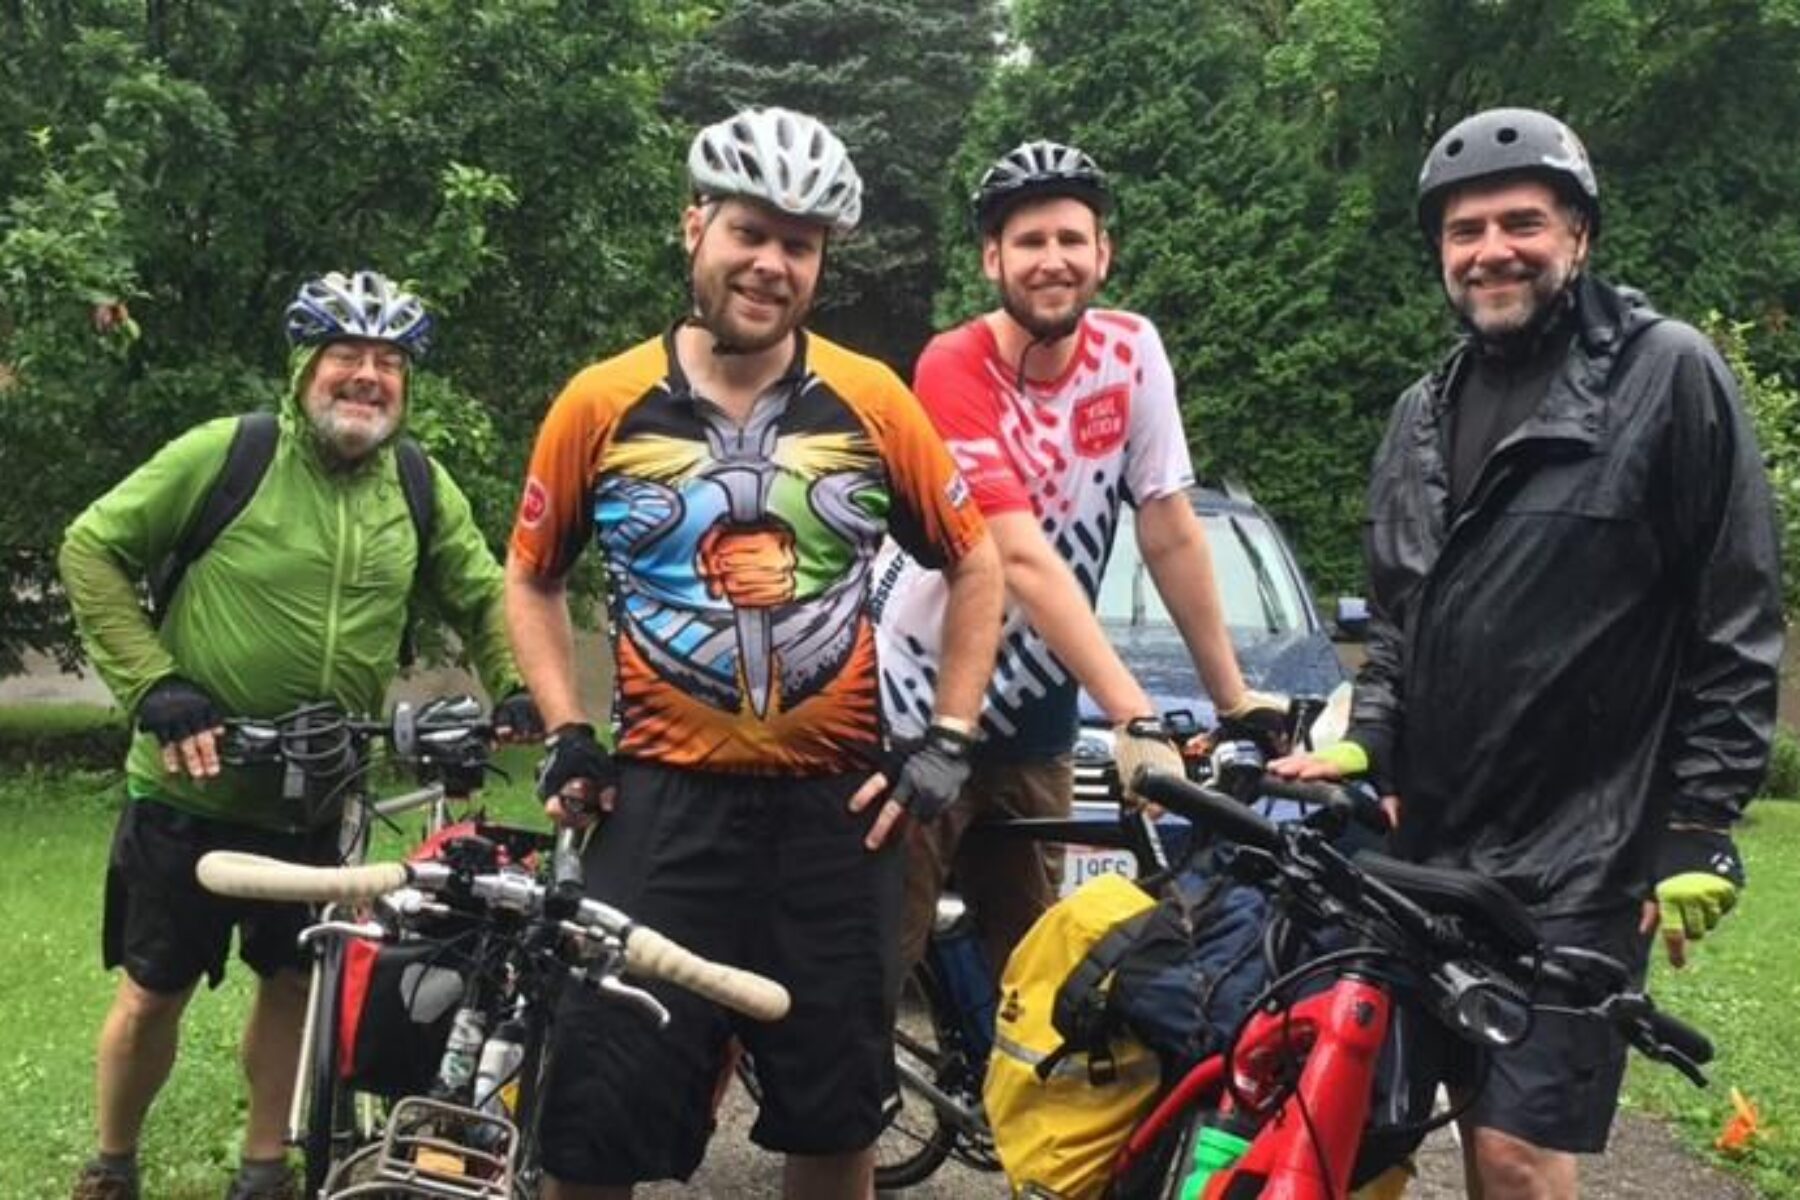 Ohio to Erie Trail adventurers (left to right)- Marty Cader, Eric Oberg, Eli Griffen and Willie Karidis | Photo by Eric Oberg